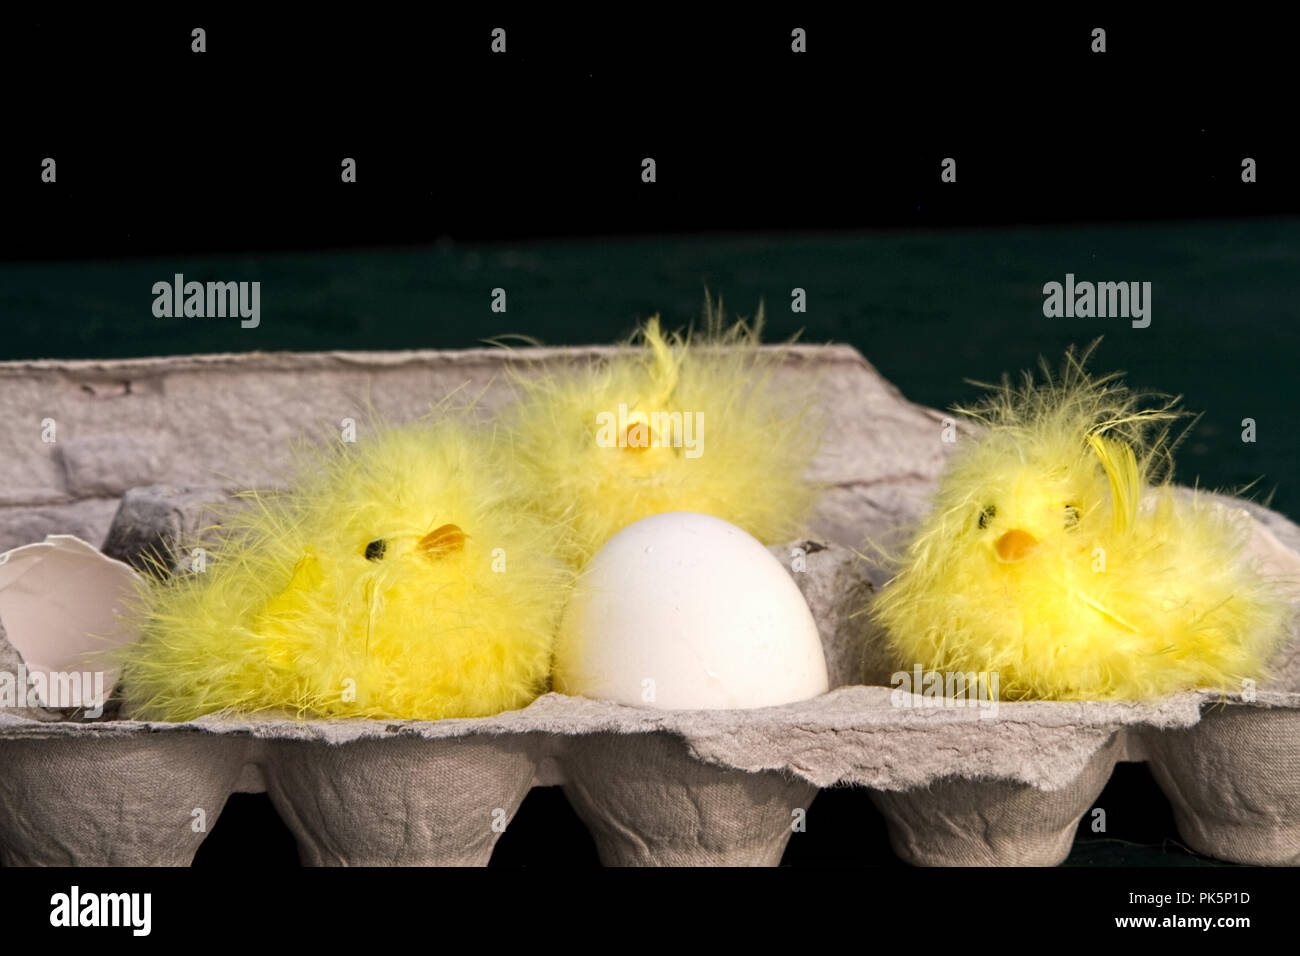 Faux baby fuzzy chicks sitting crevices inside egg carton along with real egg.  Concept Image. Stock Photo